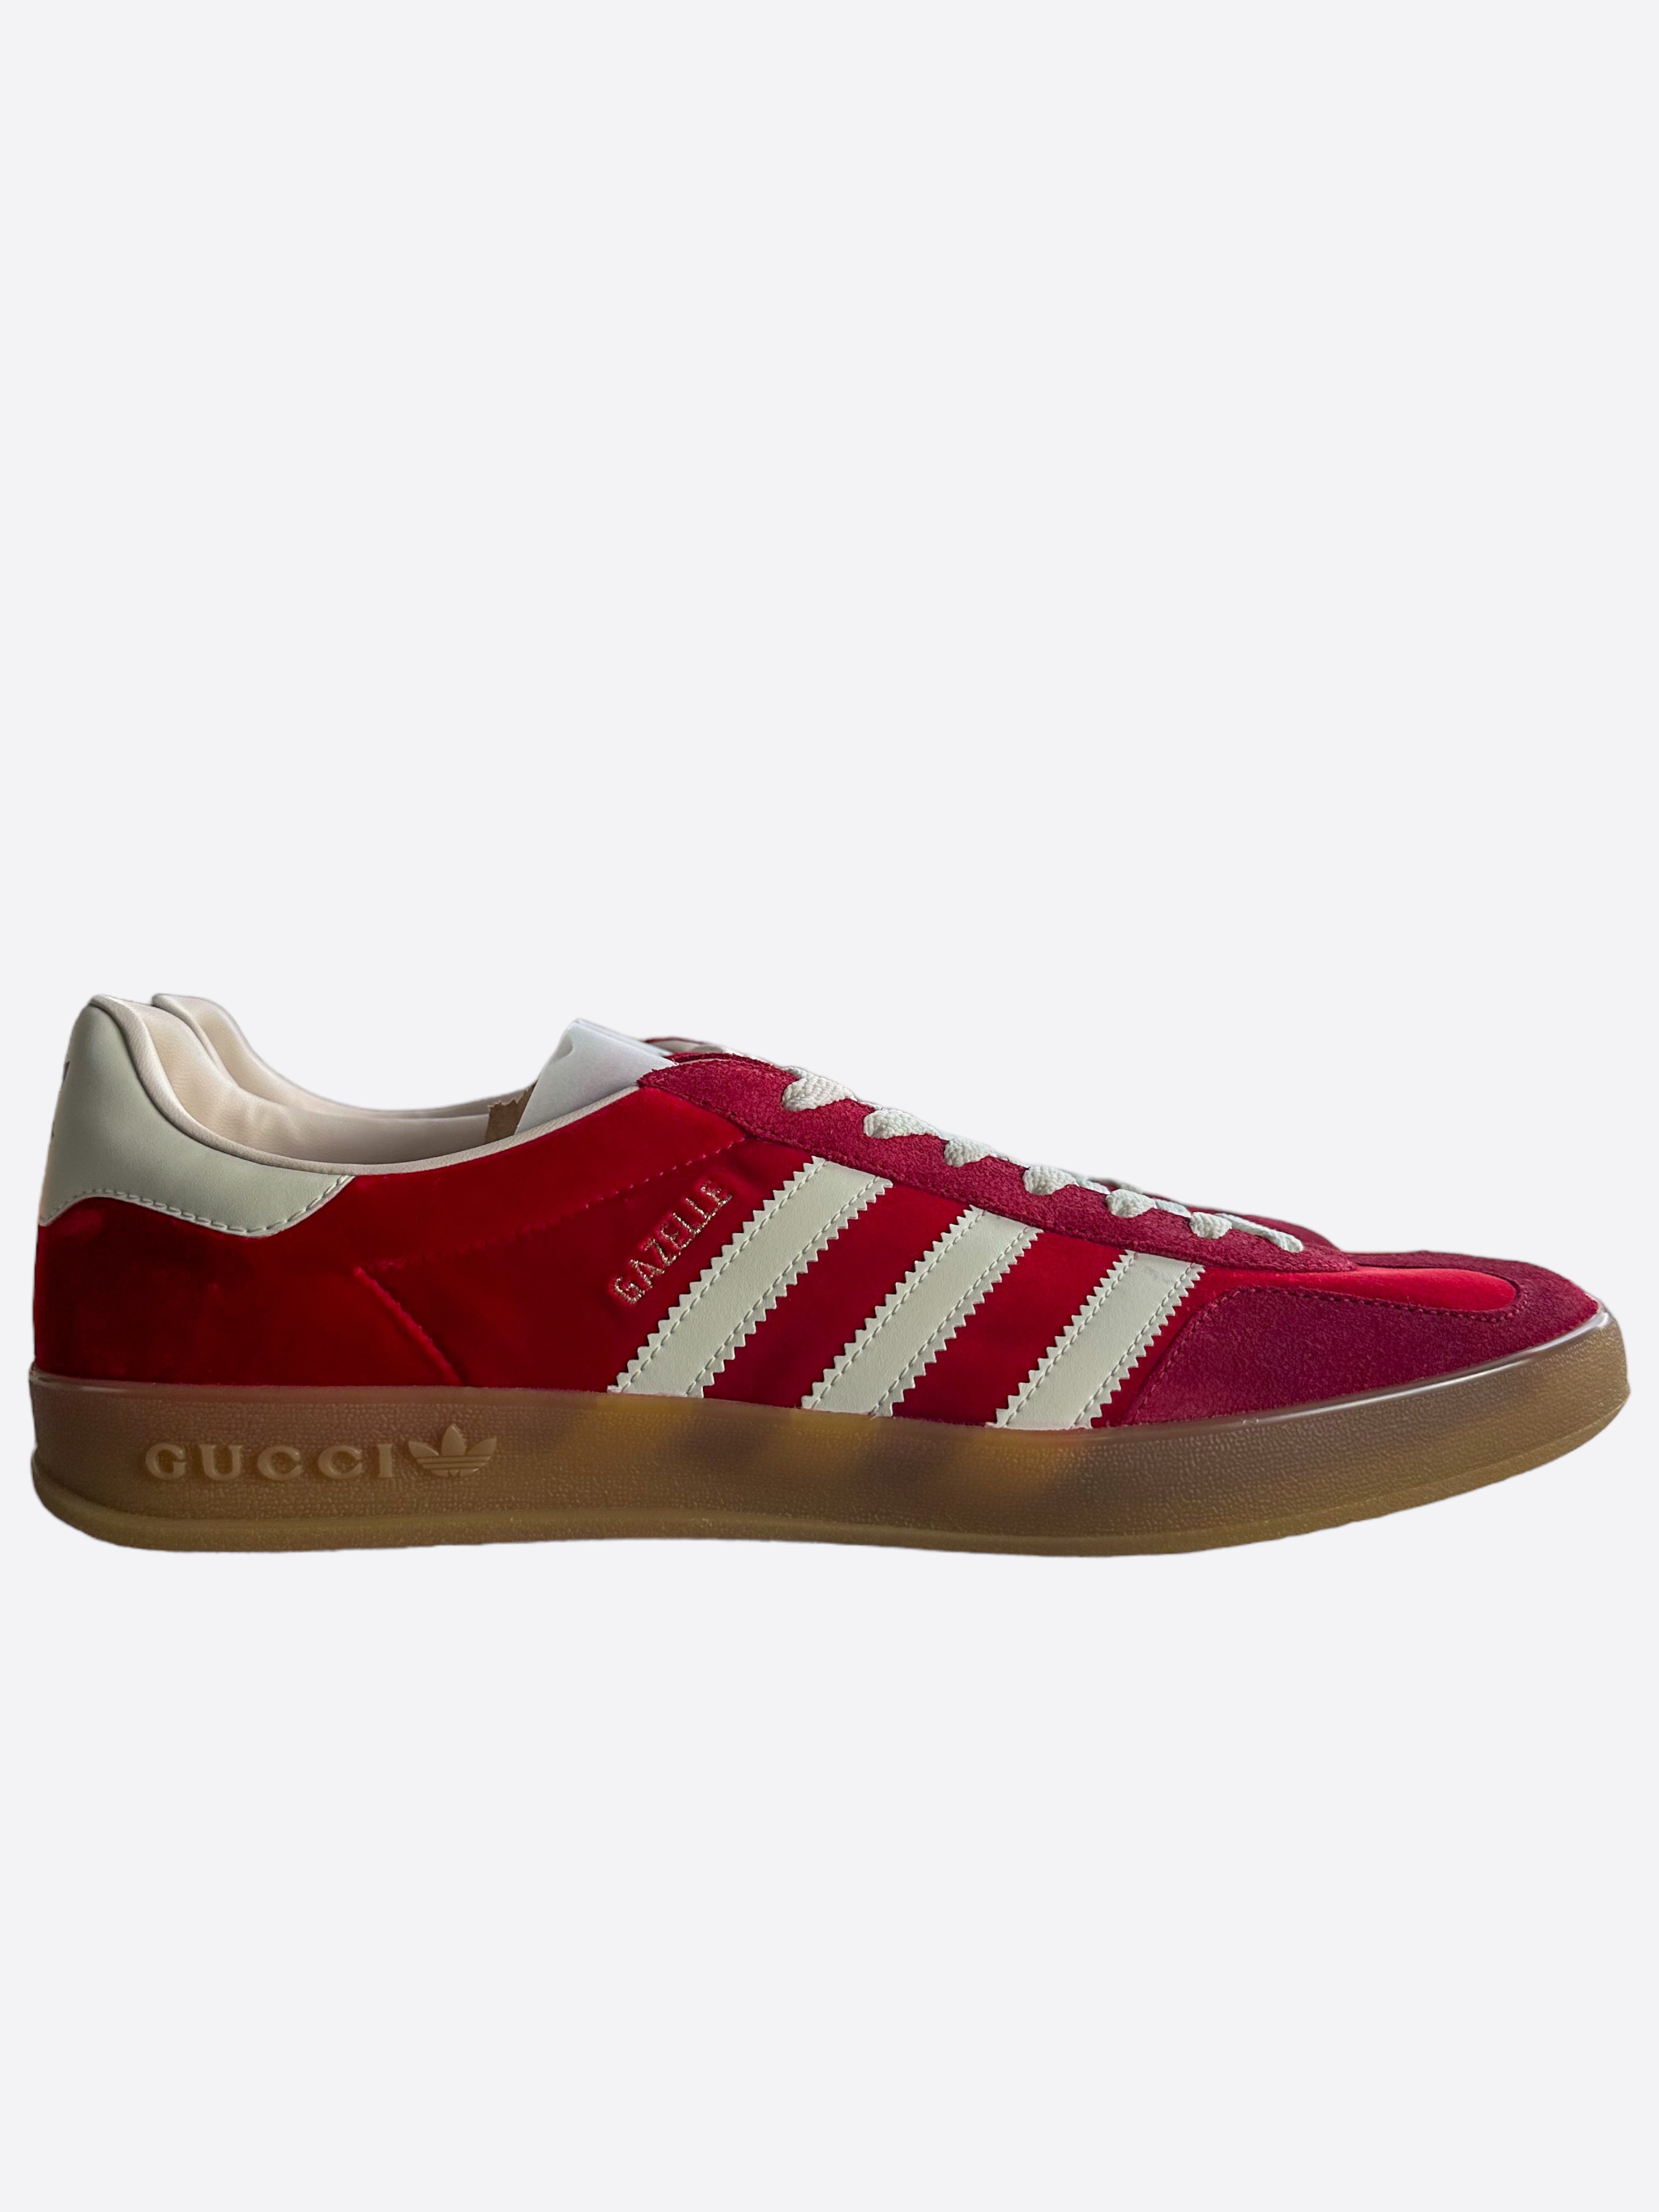 5,376 Adidas Red Images, Stock Photos, 3D objects, & Vectors | Shutterstock